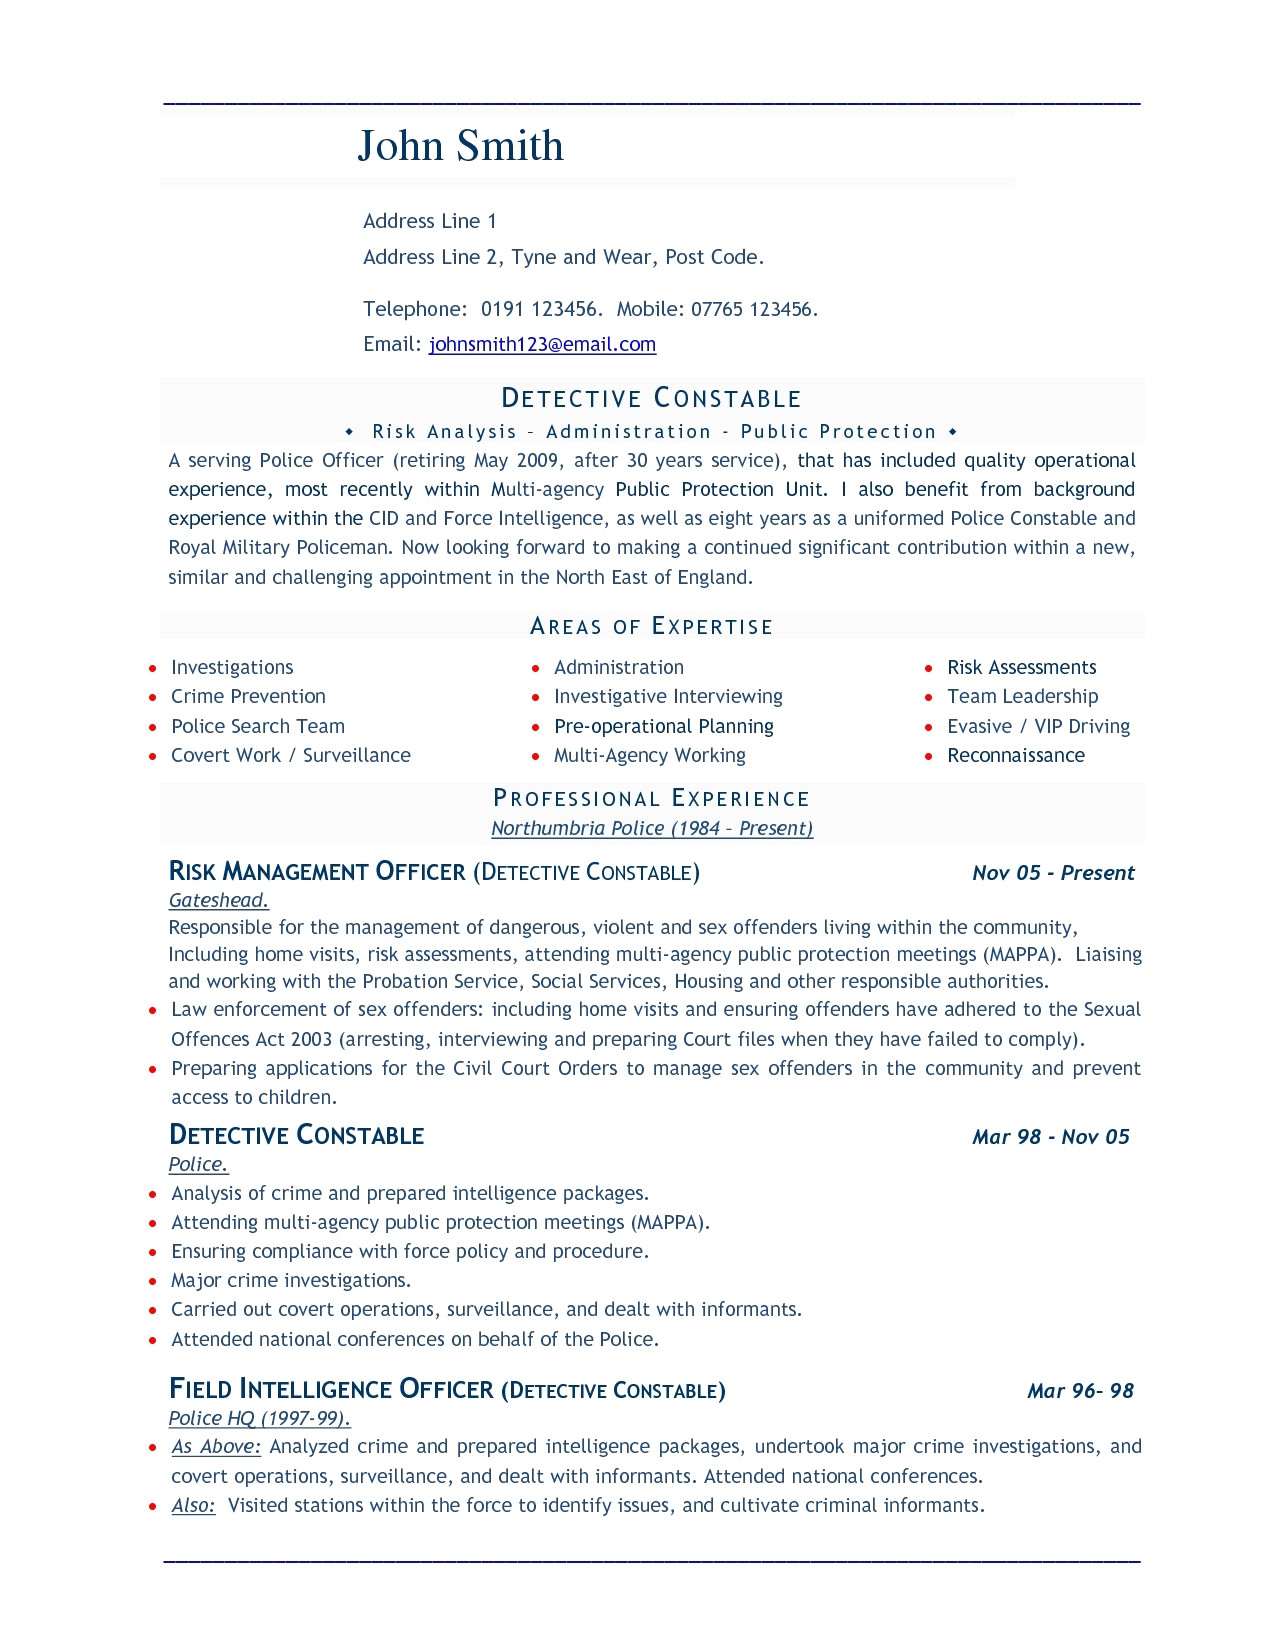 how to use resume template microsoft word 2007